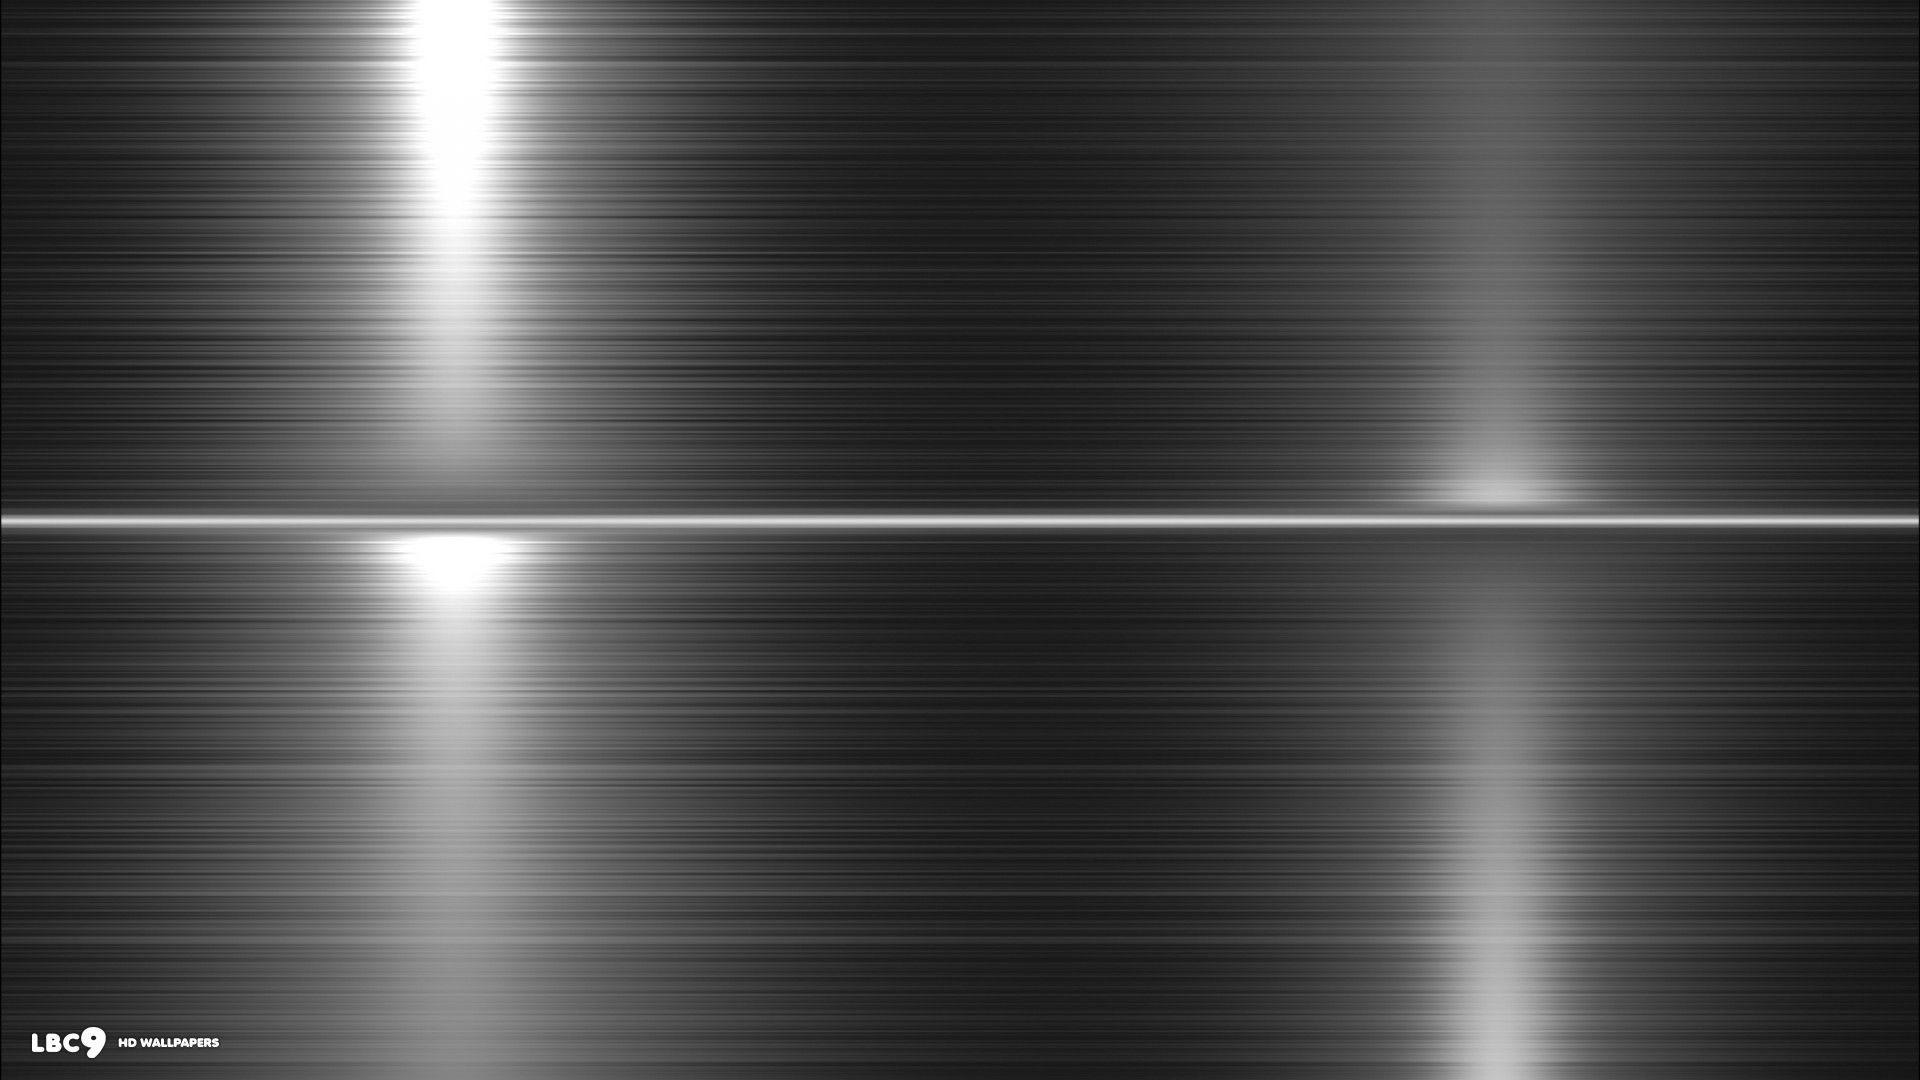 Black And Silver Background Wallpaper 47 Images